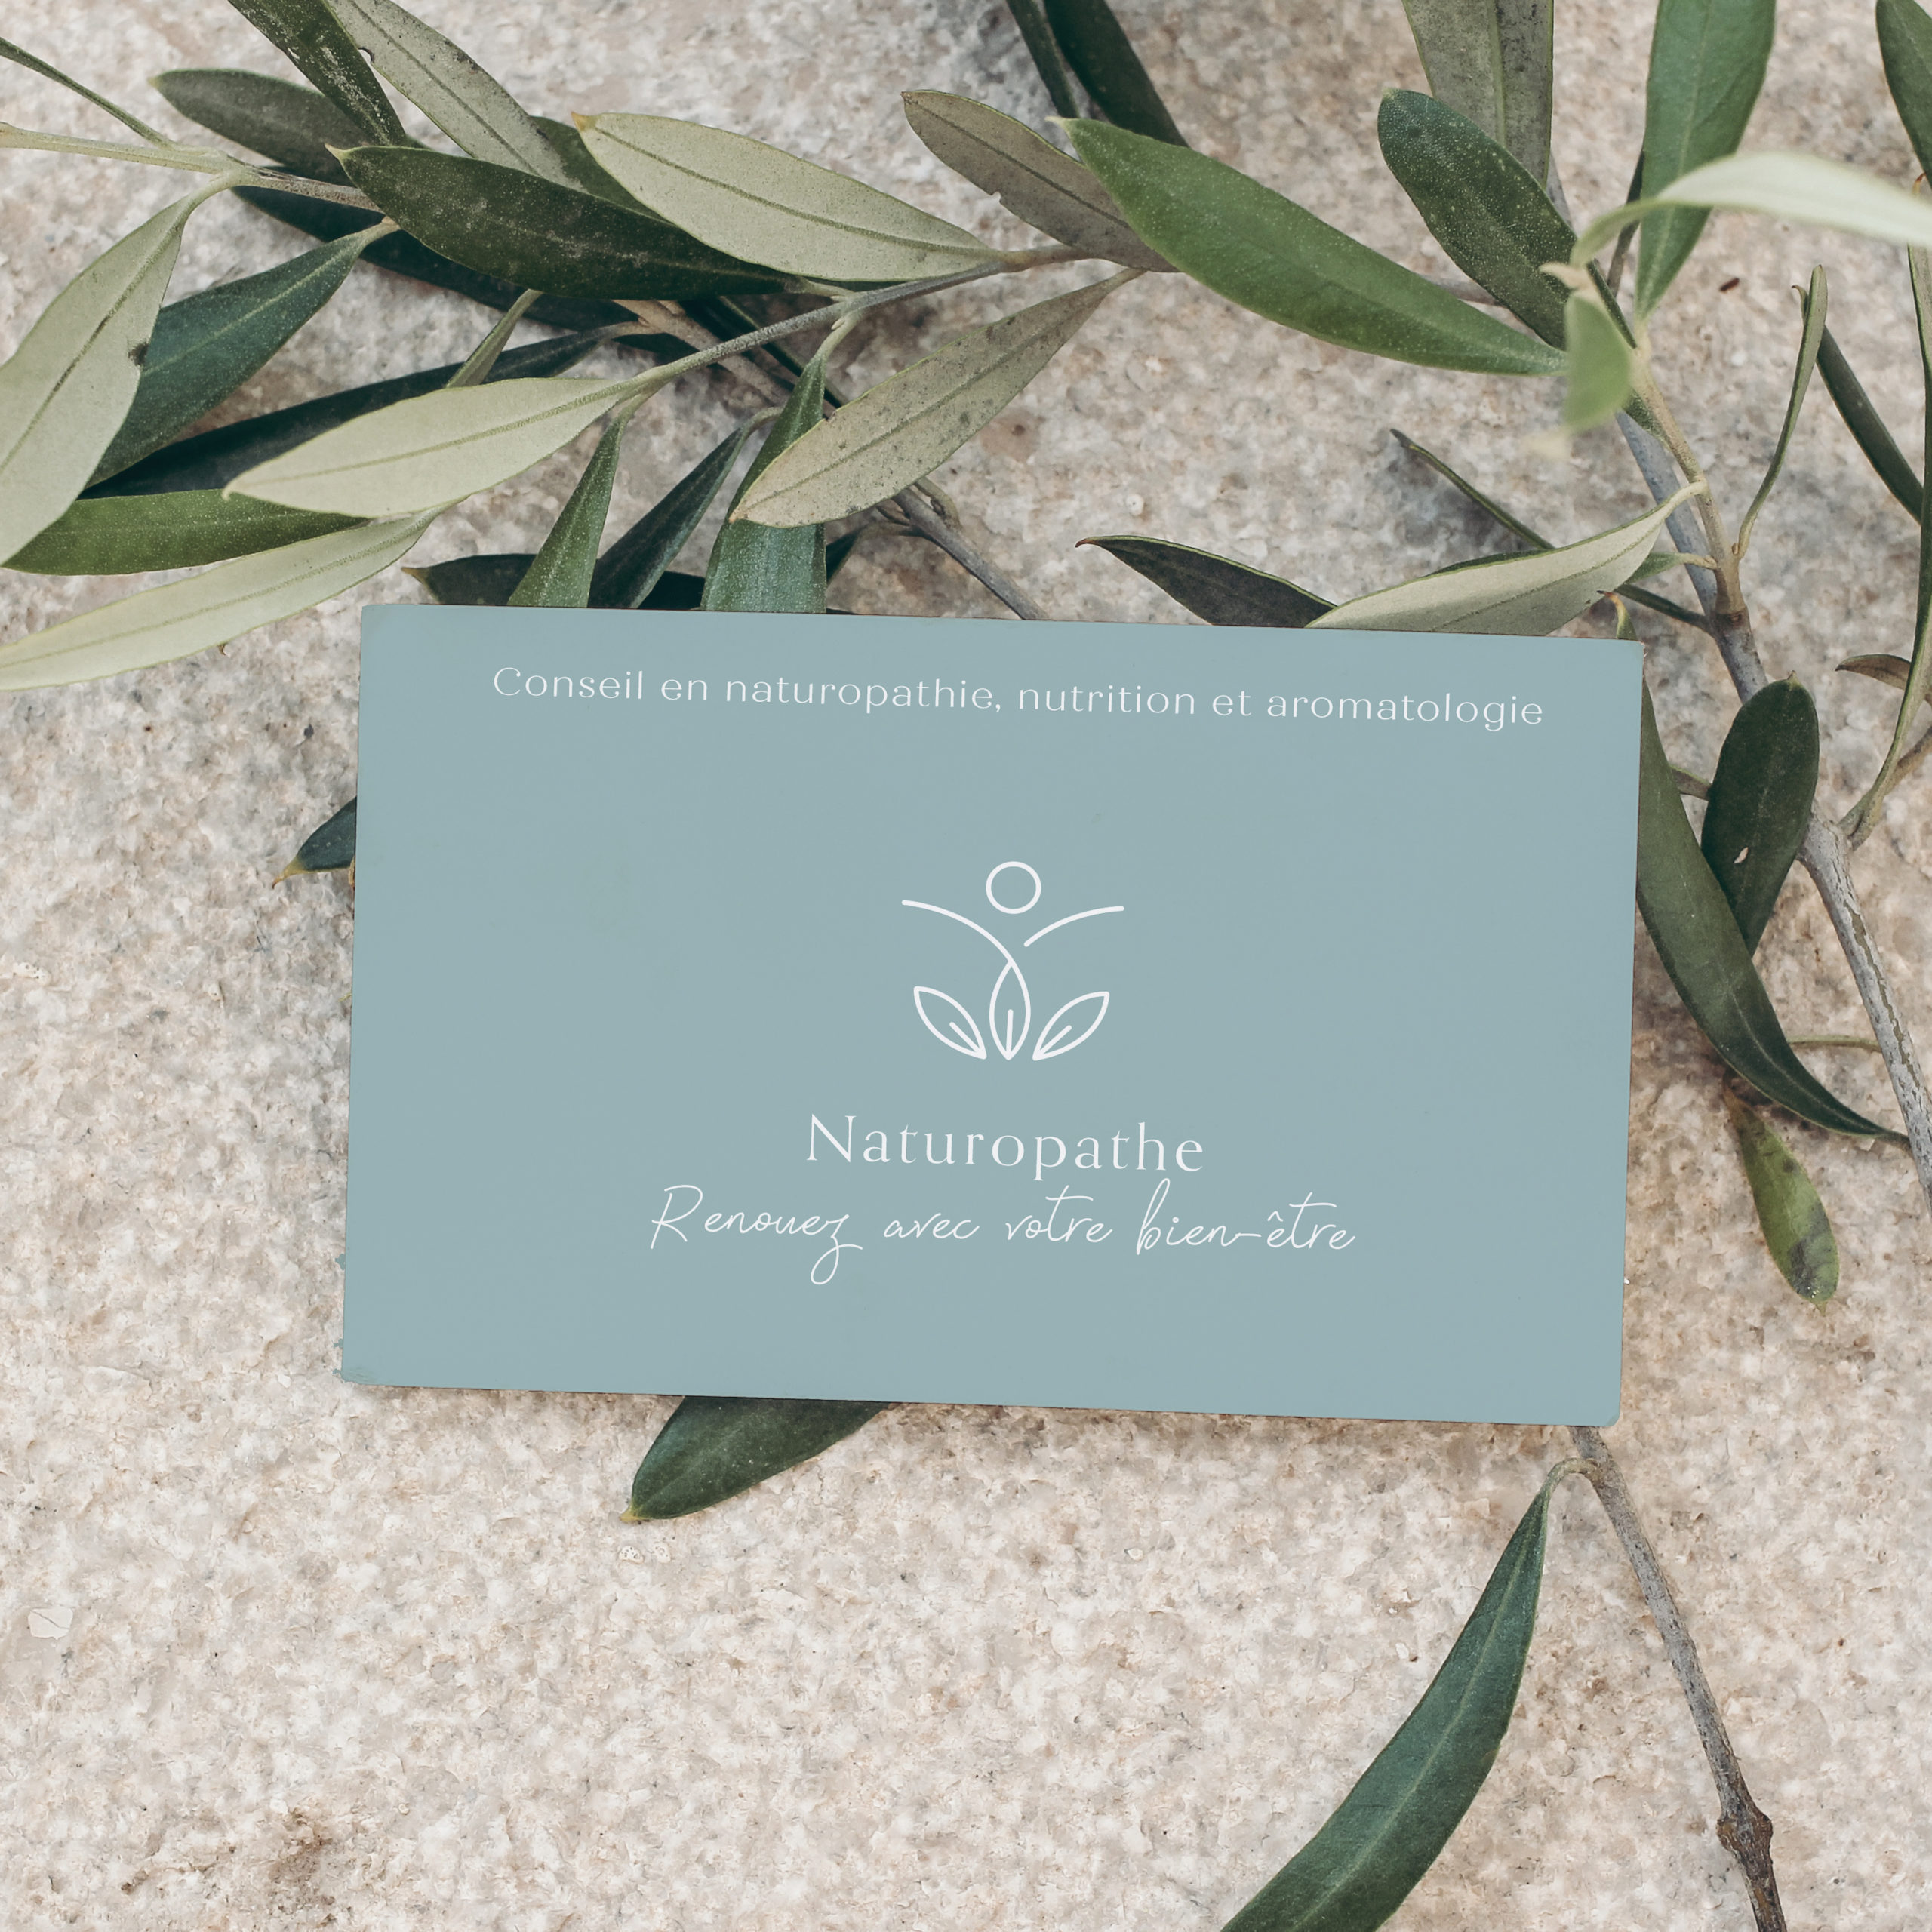 Summer stationery mockup scene,. Blank business card on concrete floor. Textured background with olive tree branch. Mediterranean design. Branding concept. Flat lay, top view, no people.